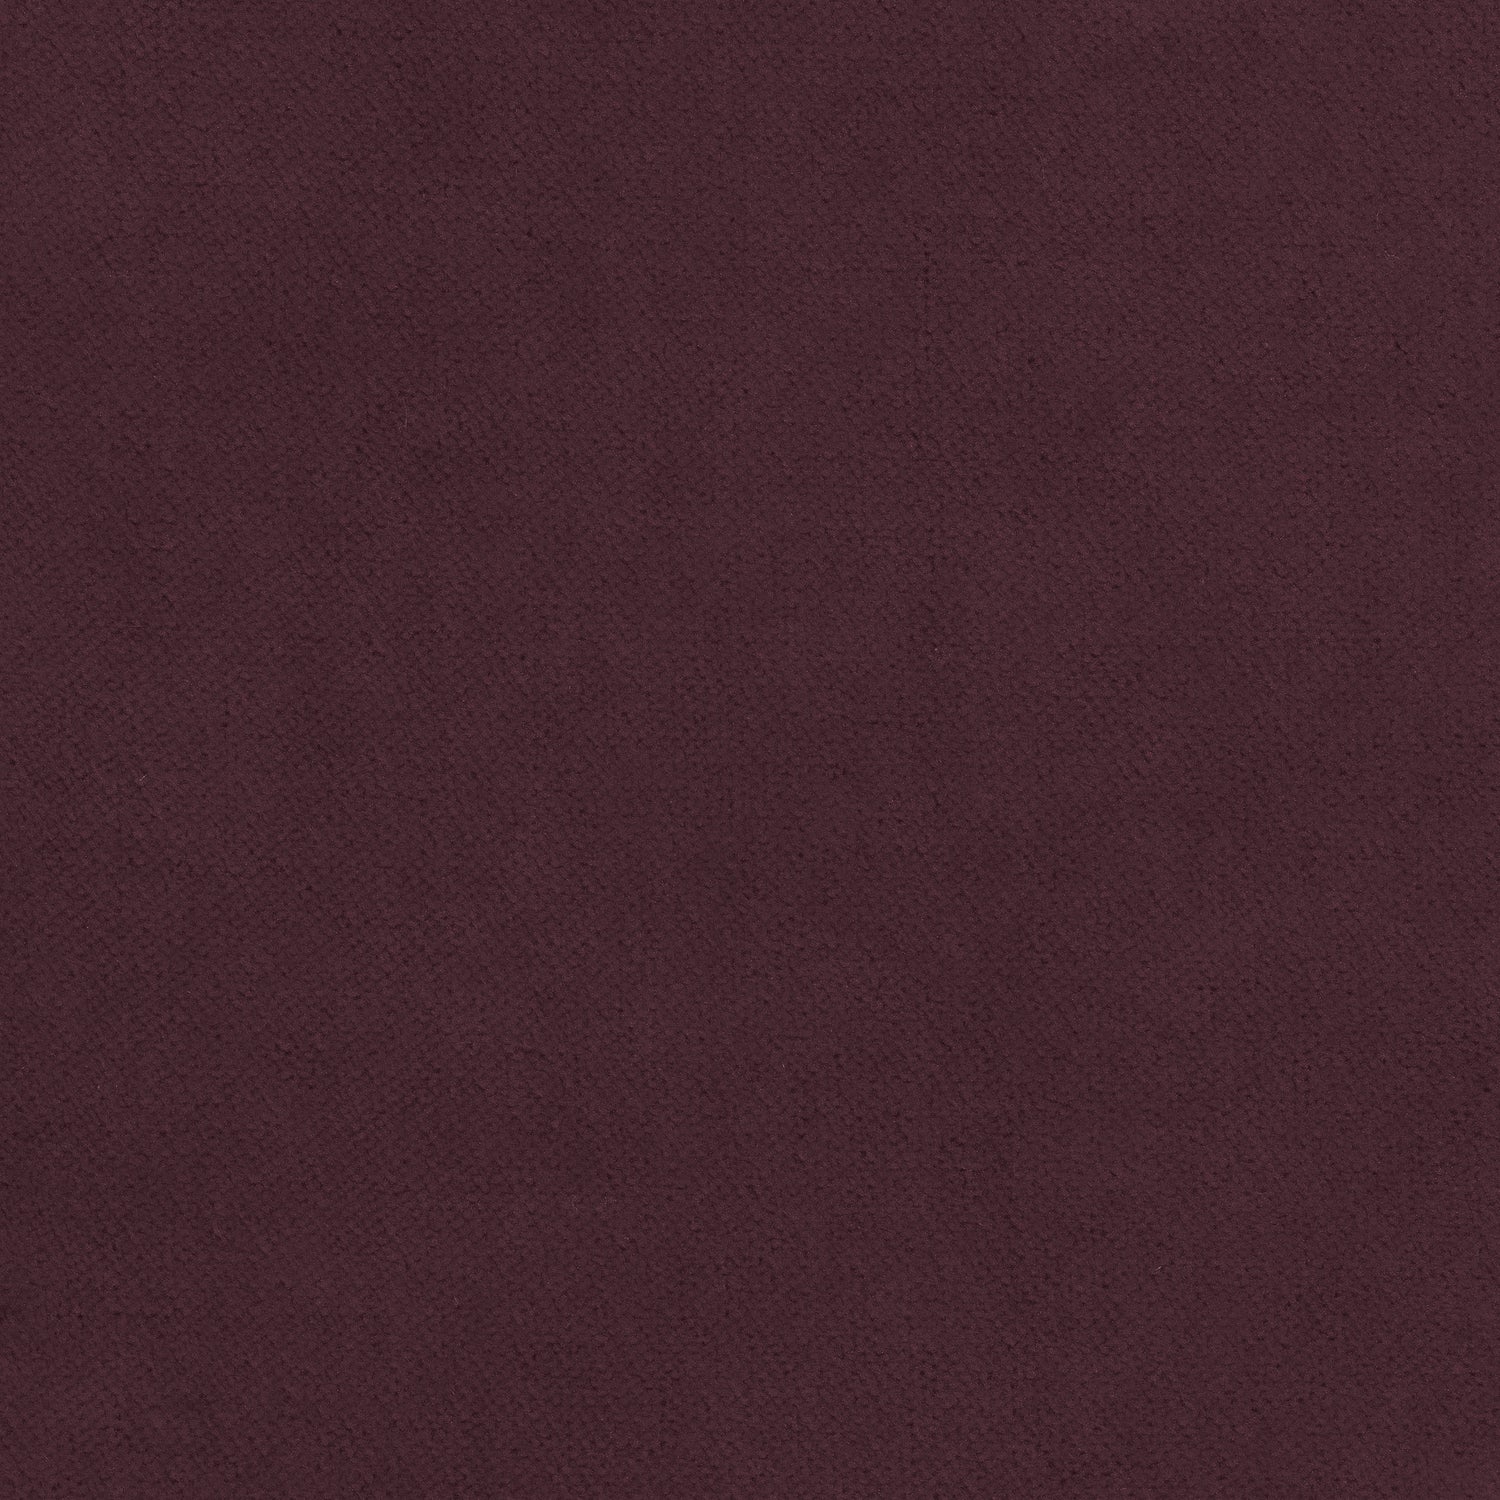 Club Velvet fabric in aubergine color - pattern number W7211 - by Thibaut in the Club Velvet collection